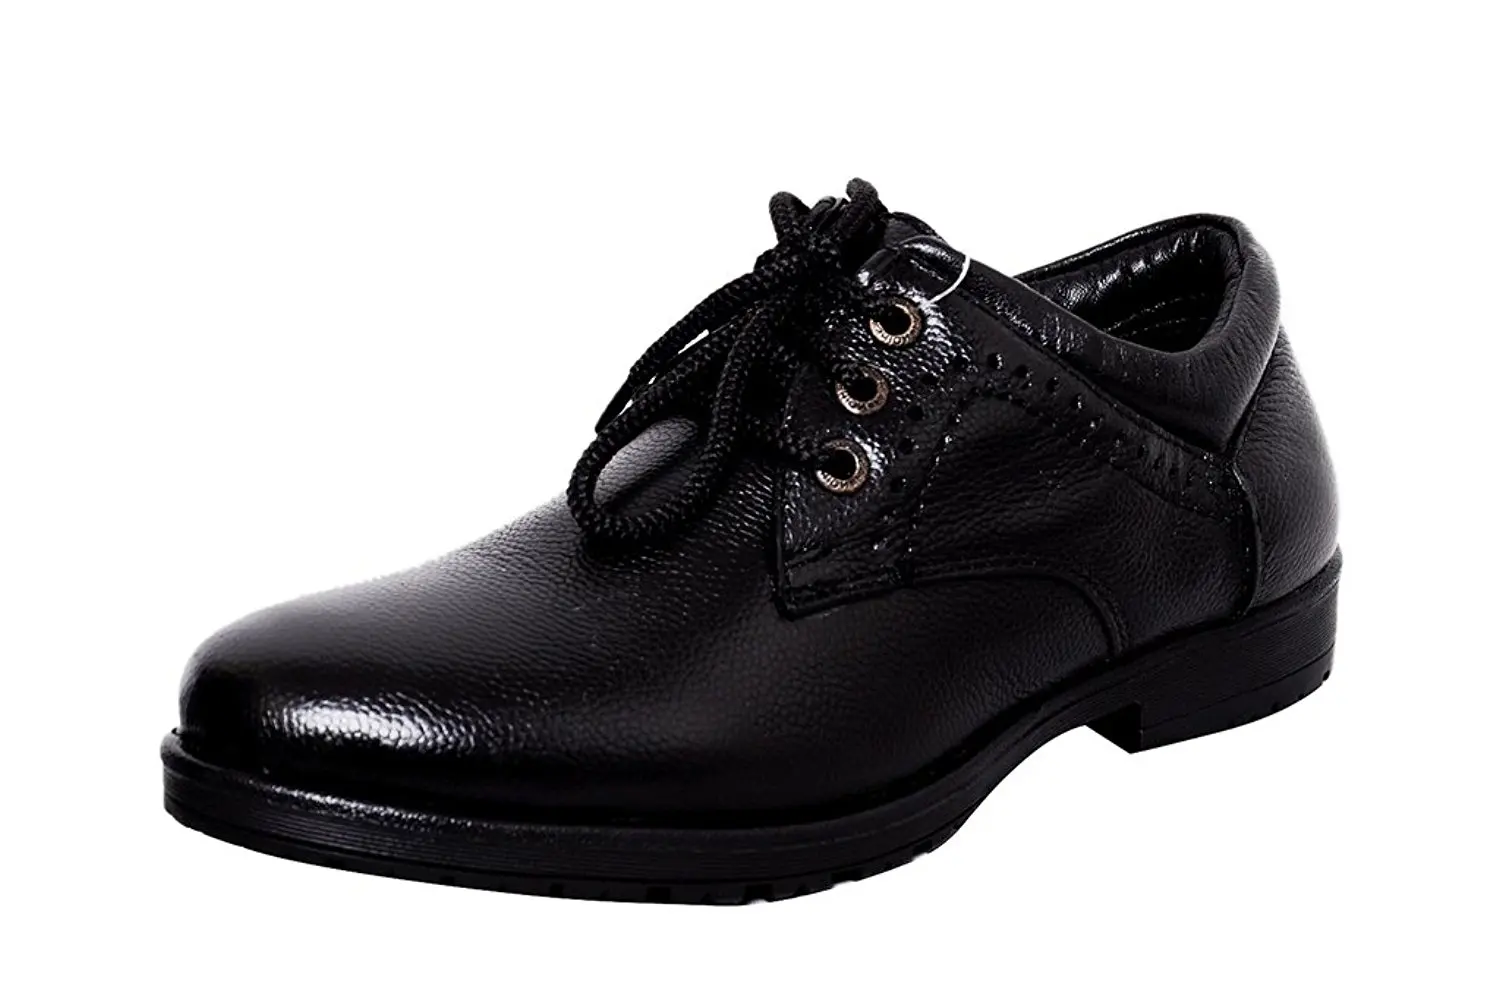 leather shoes online purchase